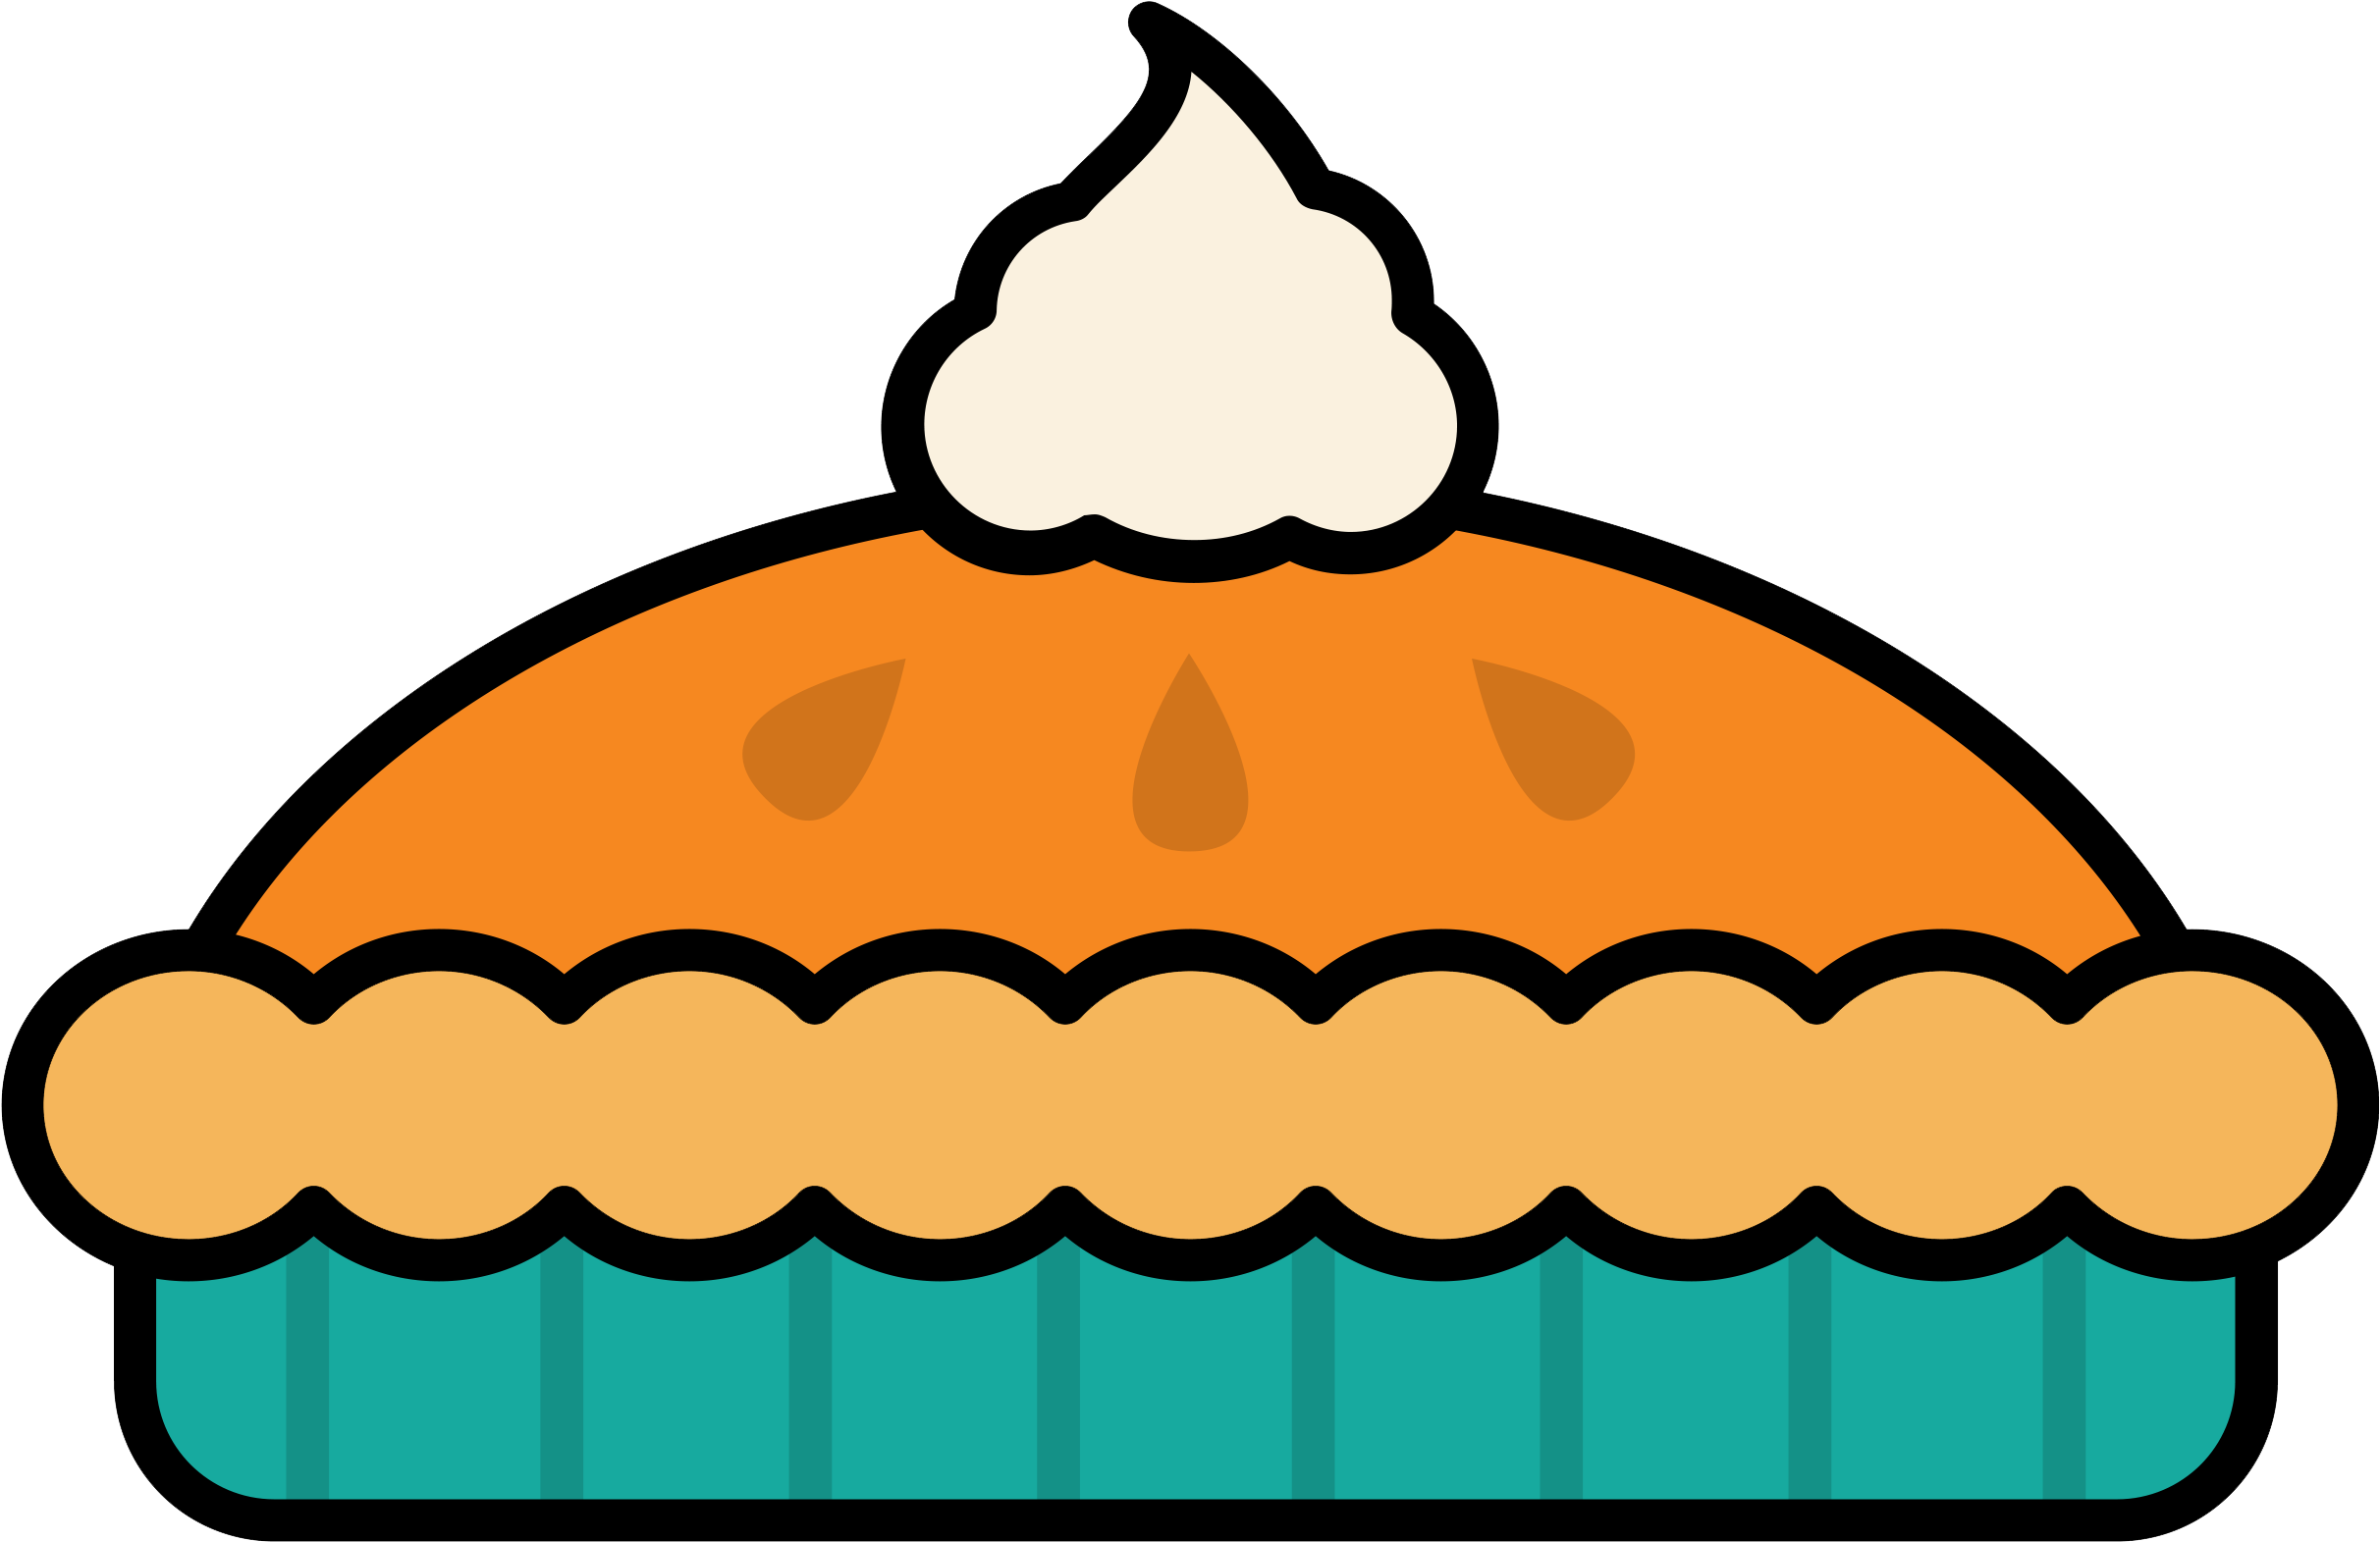 Pumpkin Pie With Whipped Cream Clipart Images - Whipped Cream Clipart (2550x1732)